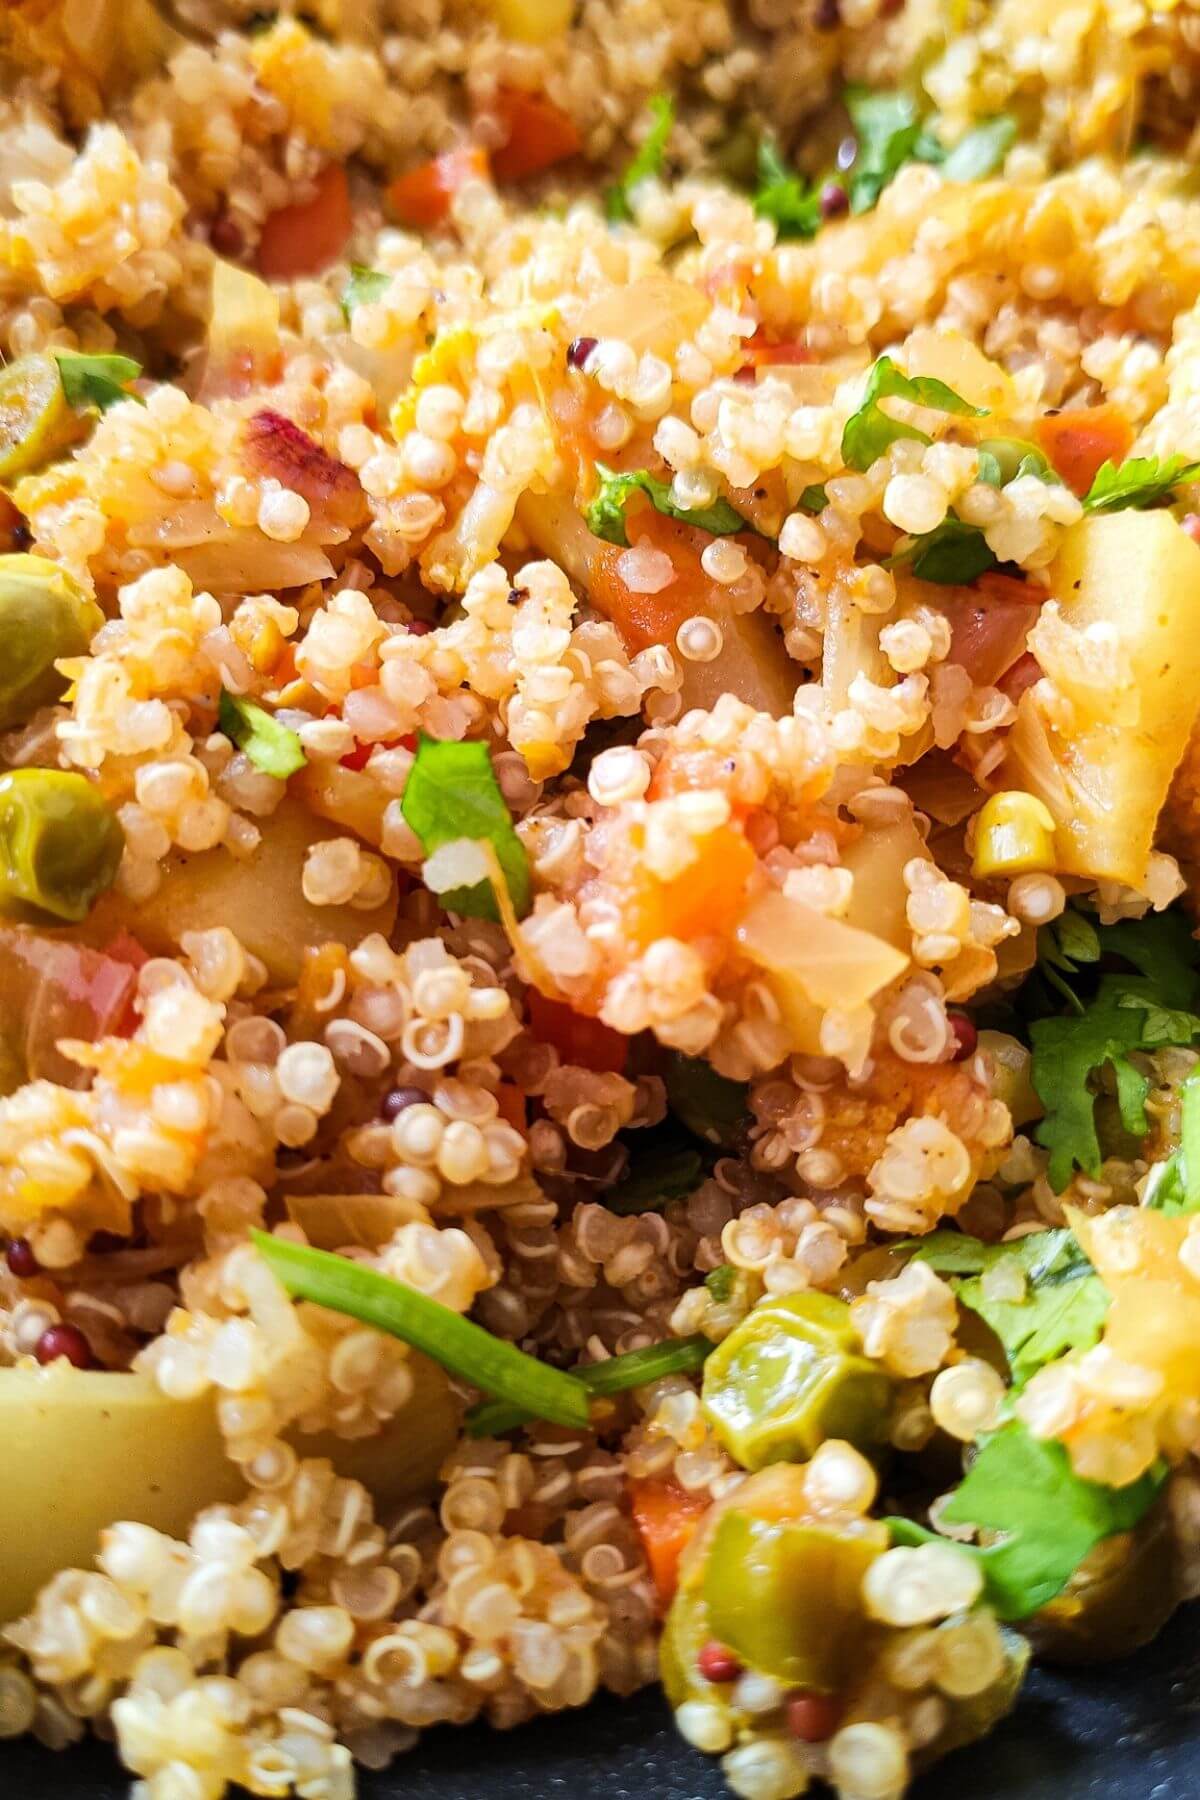 curried quinoa with vegetables garnished with cilantro.